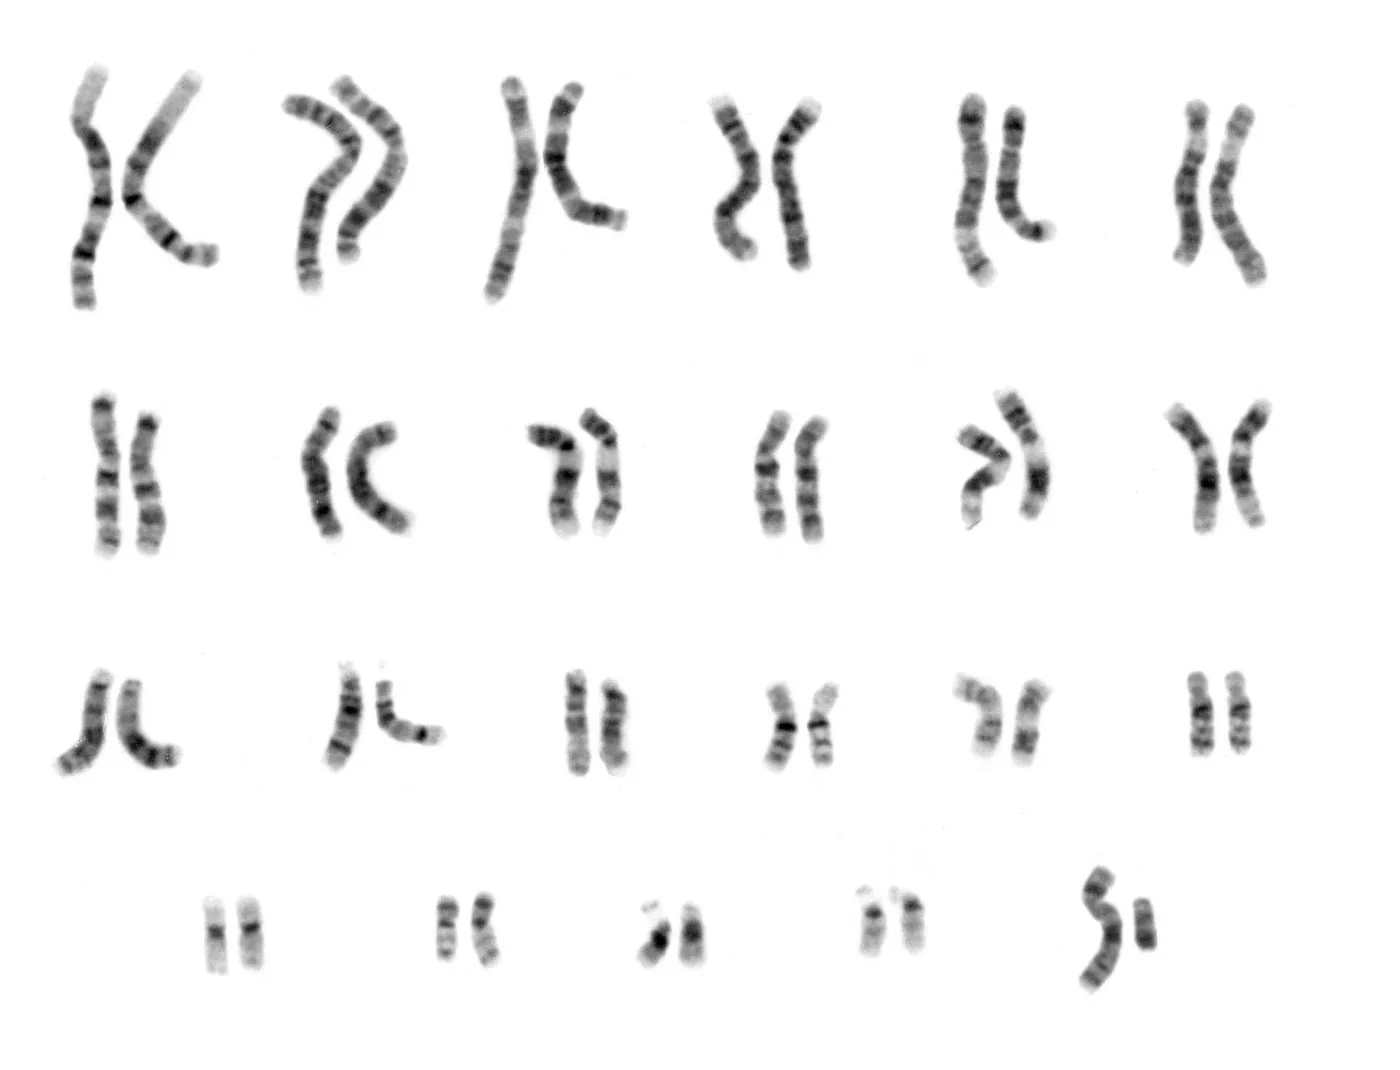 A composite photograph of the chromosomes of a human male, called a karyotype.